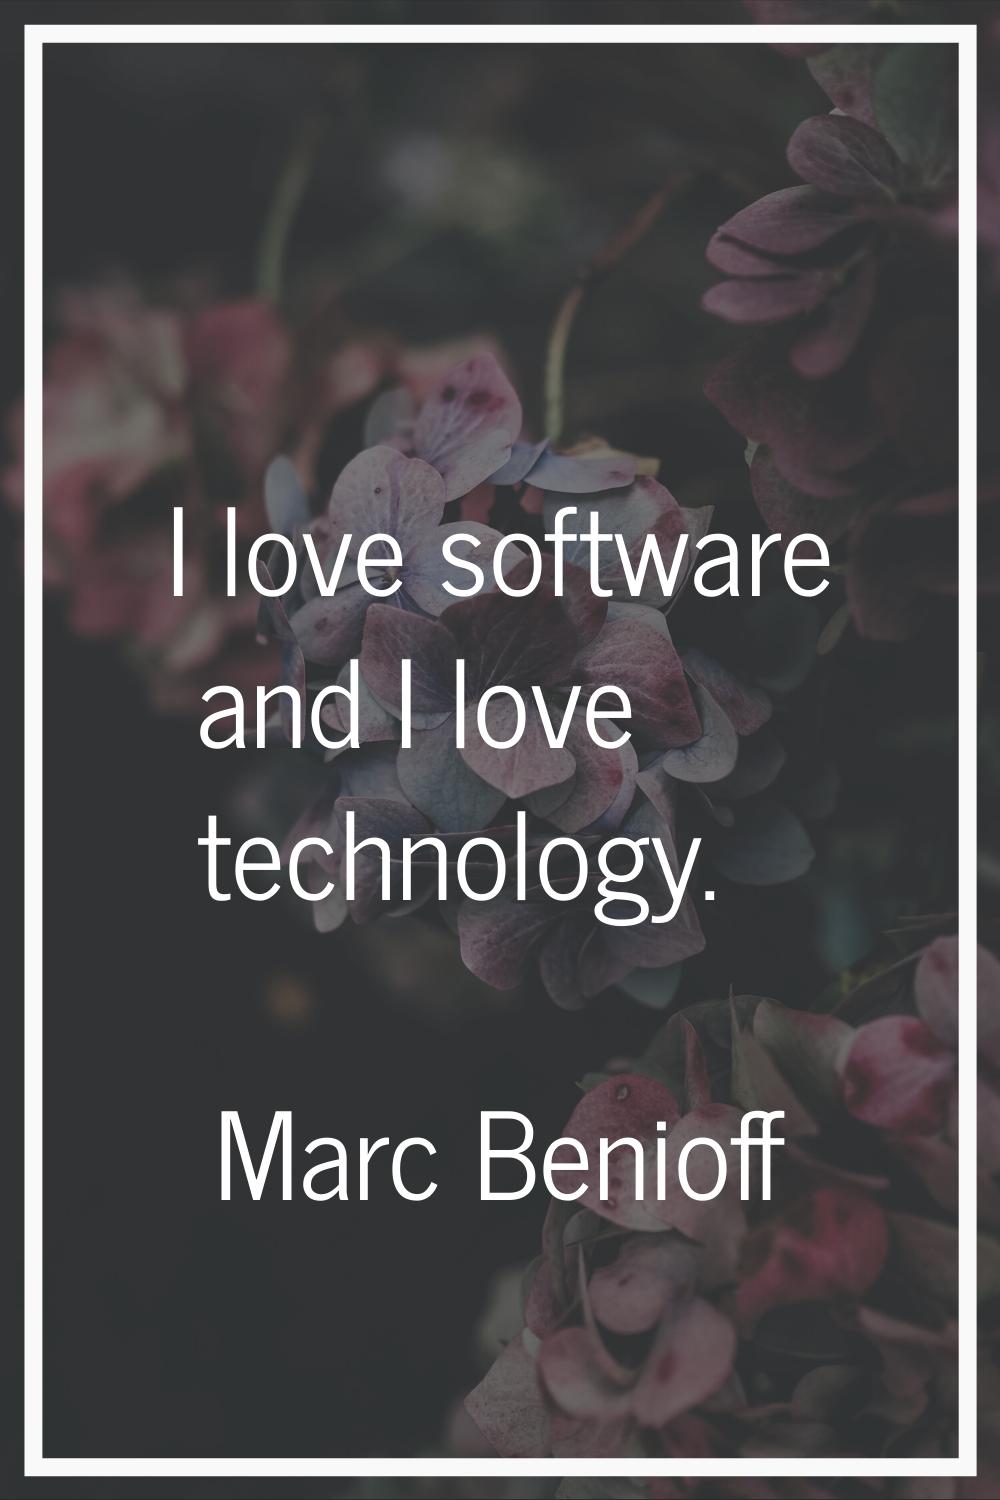 I love software and I love technology.